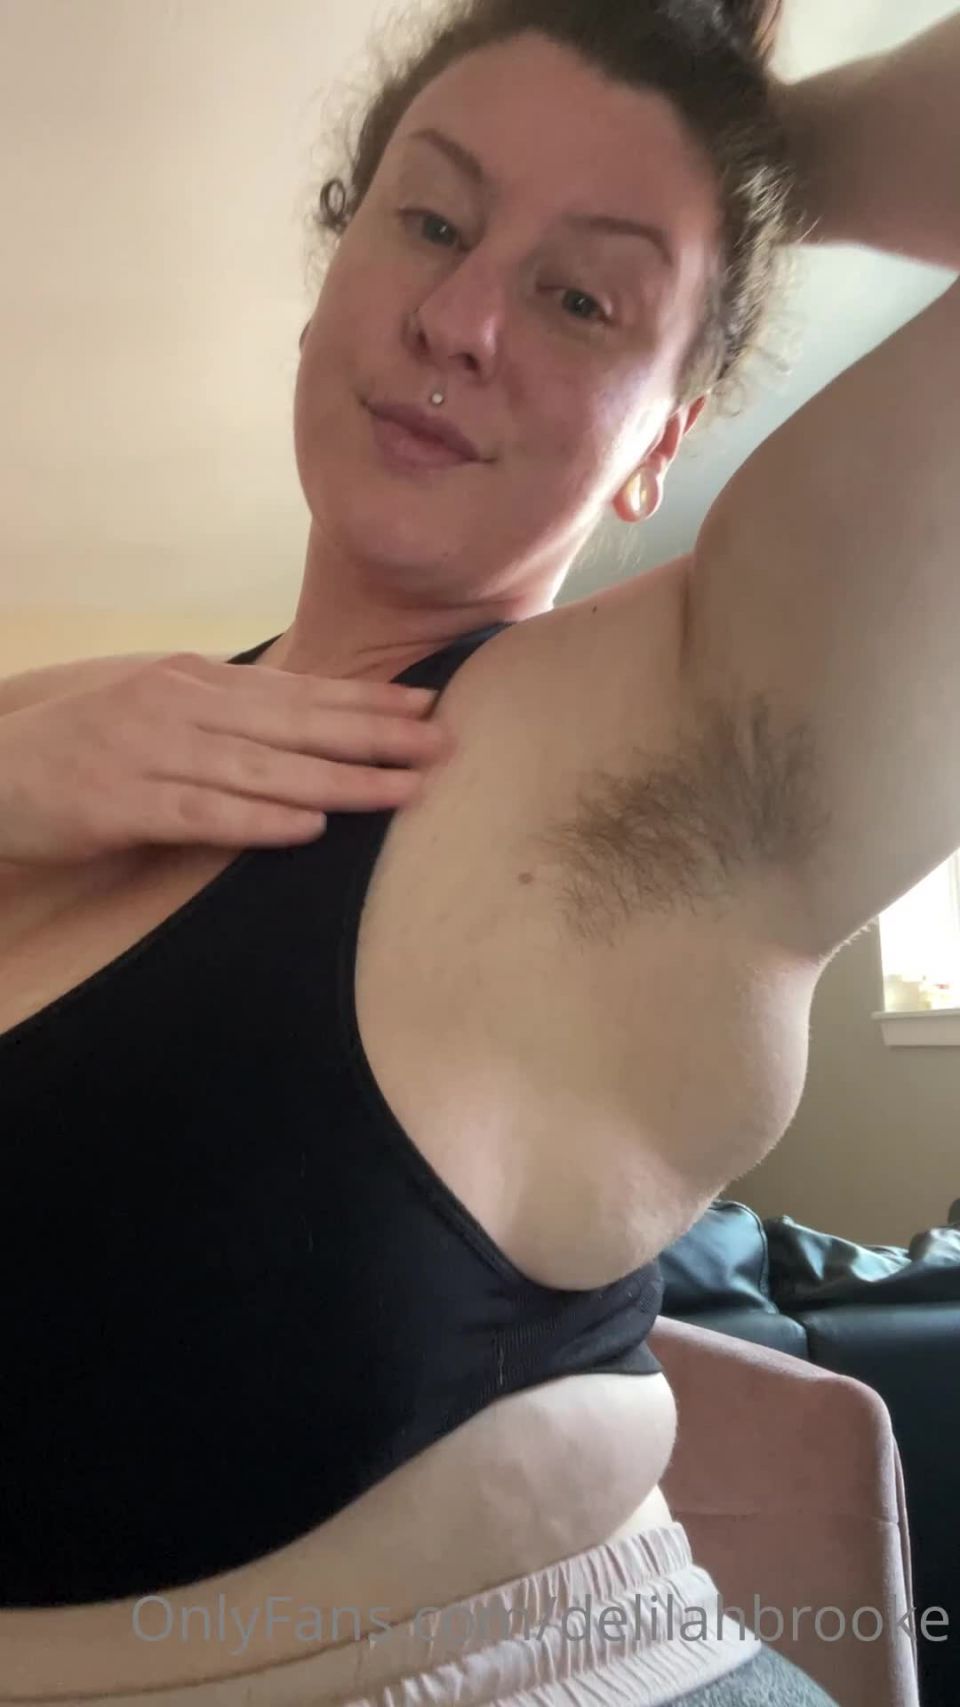 DelilahBrooke () Delilahbrooke - my pits are a little extra sweaty today they smell sooo good though trying to make it th 01-10-2021